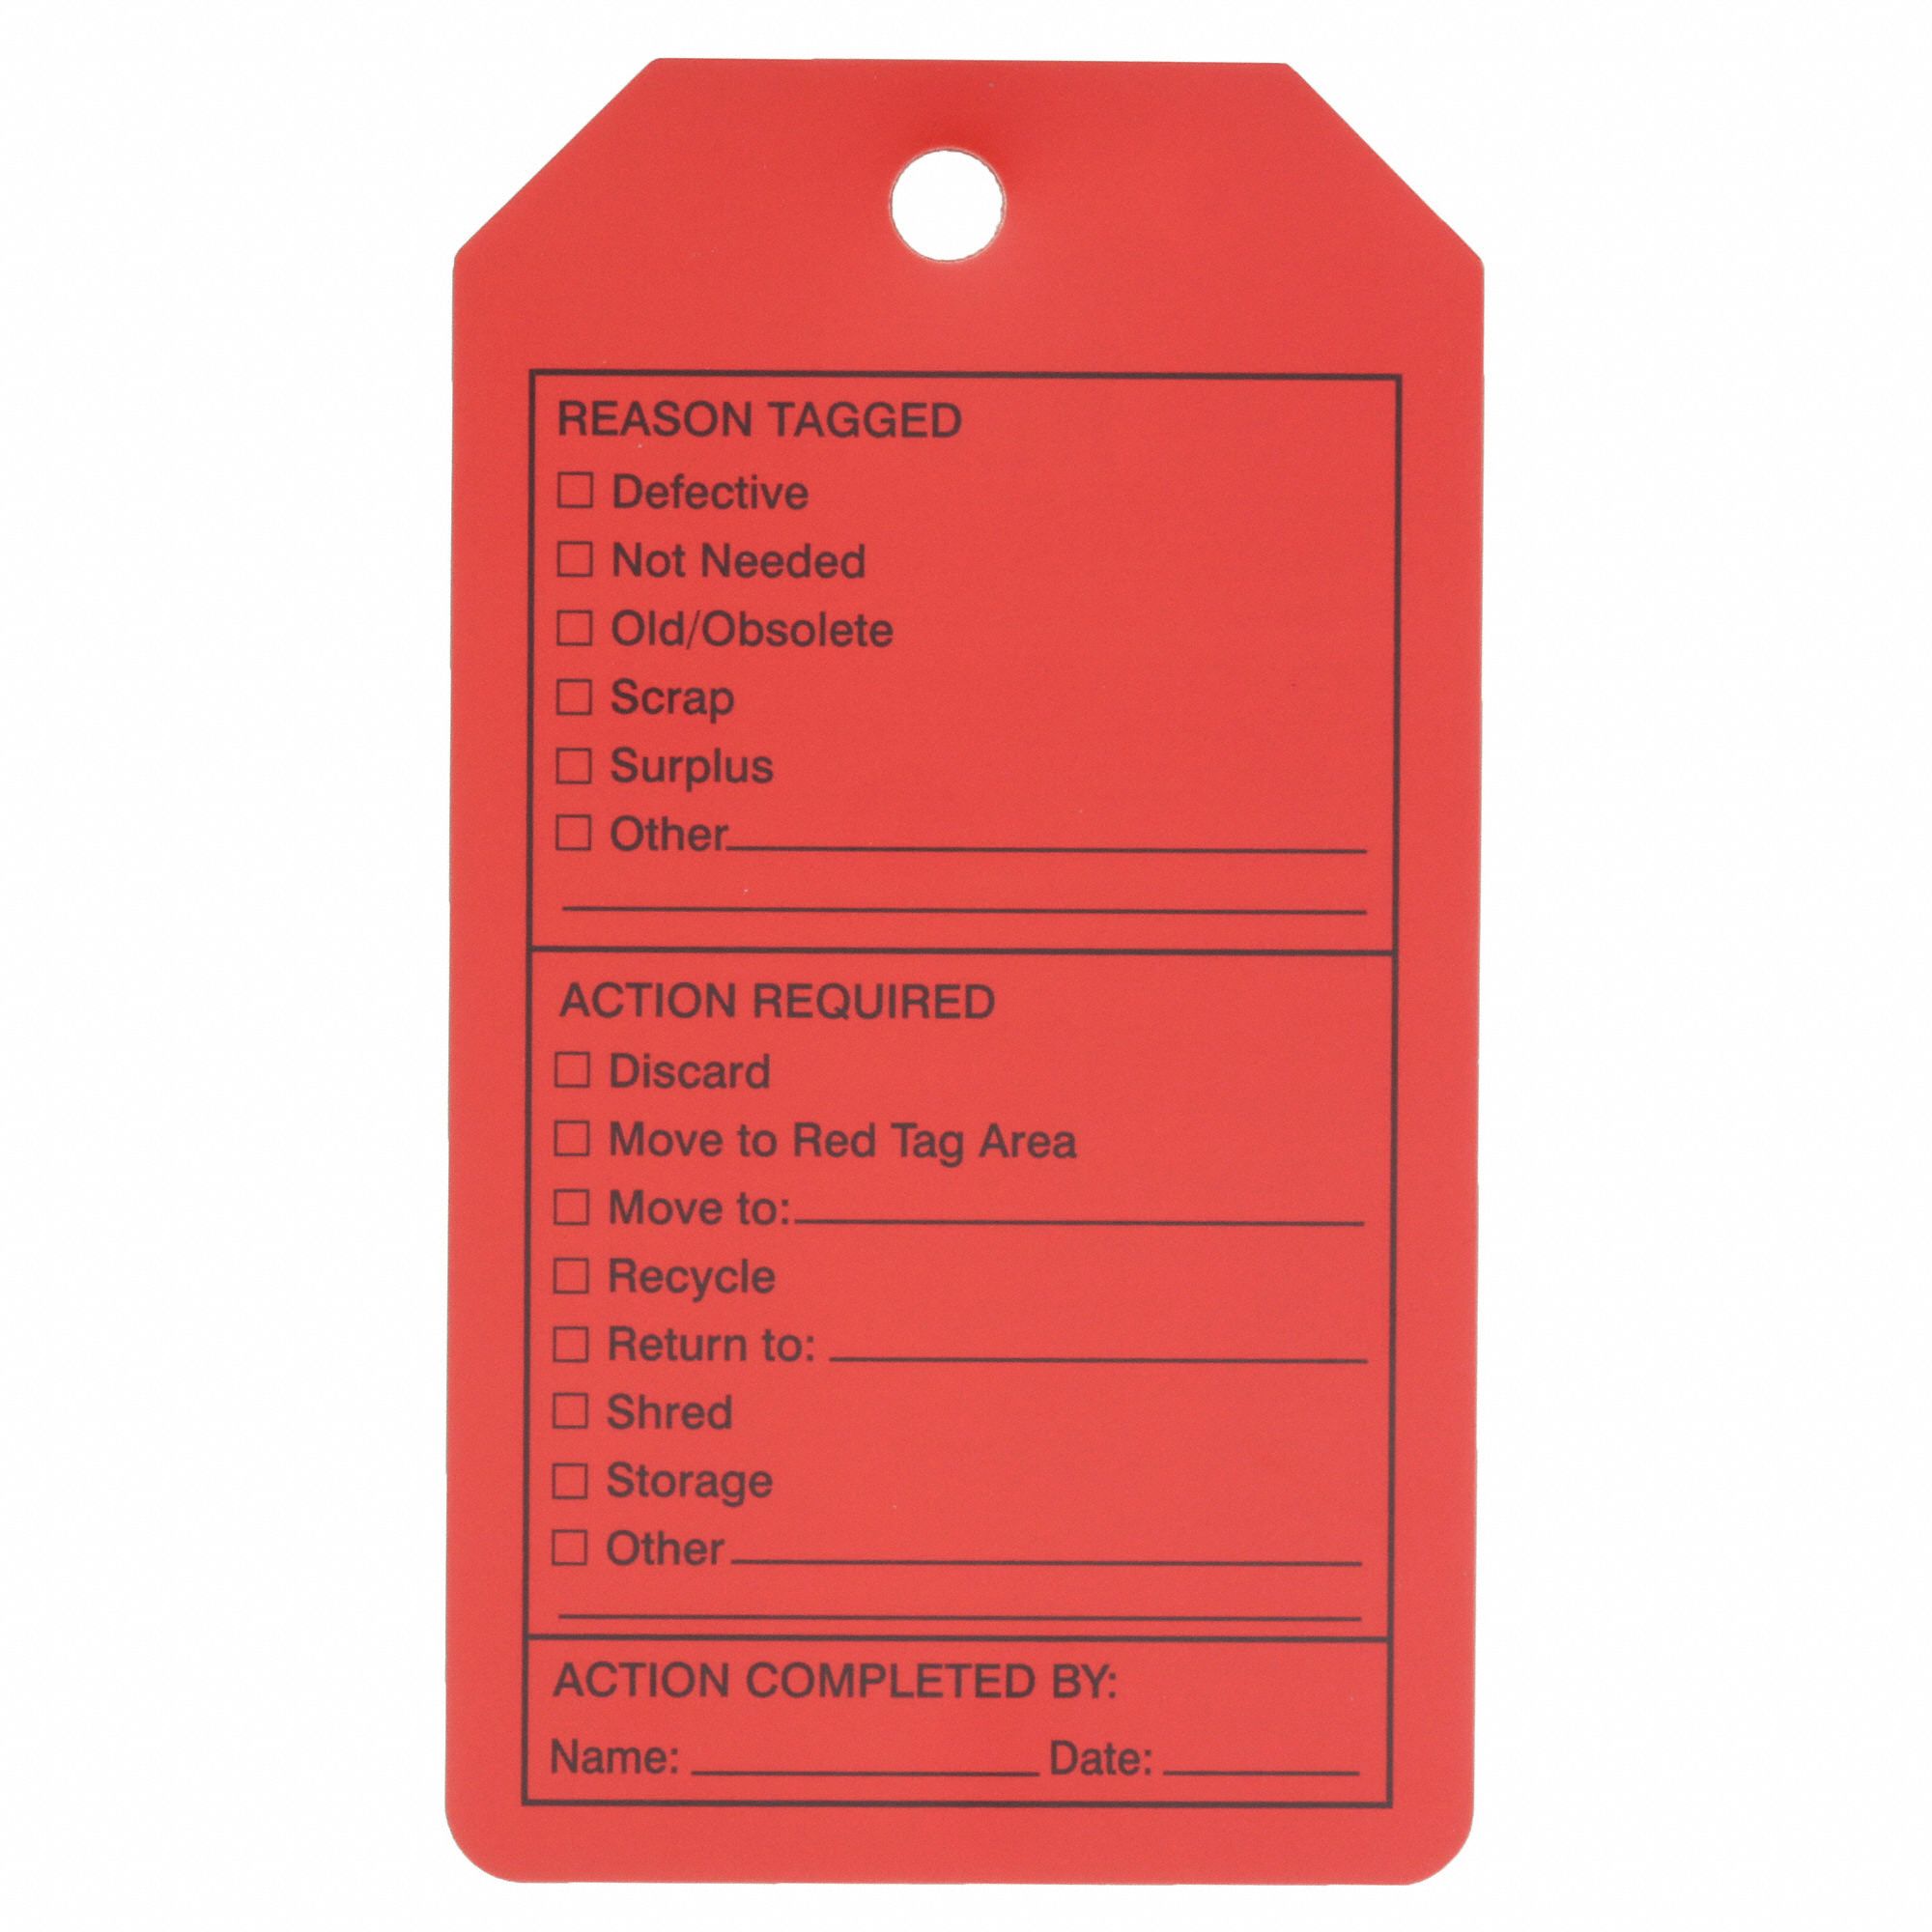 8-1/2 Length x 3-7/8 Width x 0.010 Thickness Pack of 5 green On White Accuform TRS325CTM Accuform PF-Cardstock Jumbo Tag LegendScaffold Inspection LegendScaffold Inspection 8-1/2 Length x 3-7/8 Width x 0.010 Thickness 